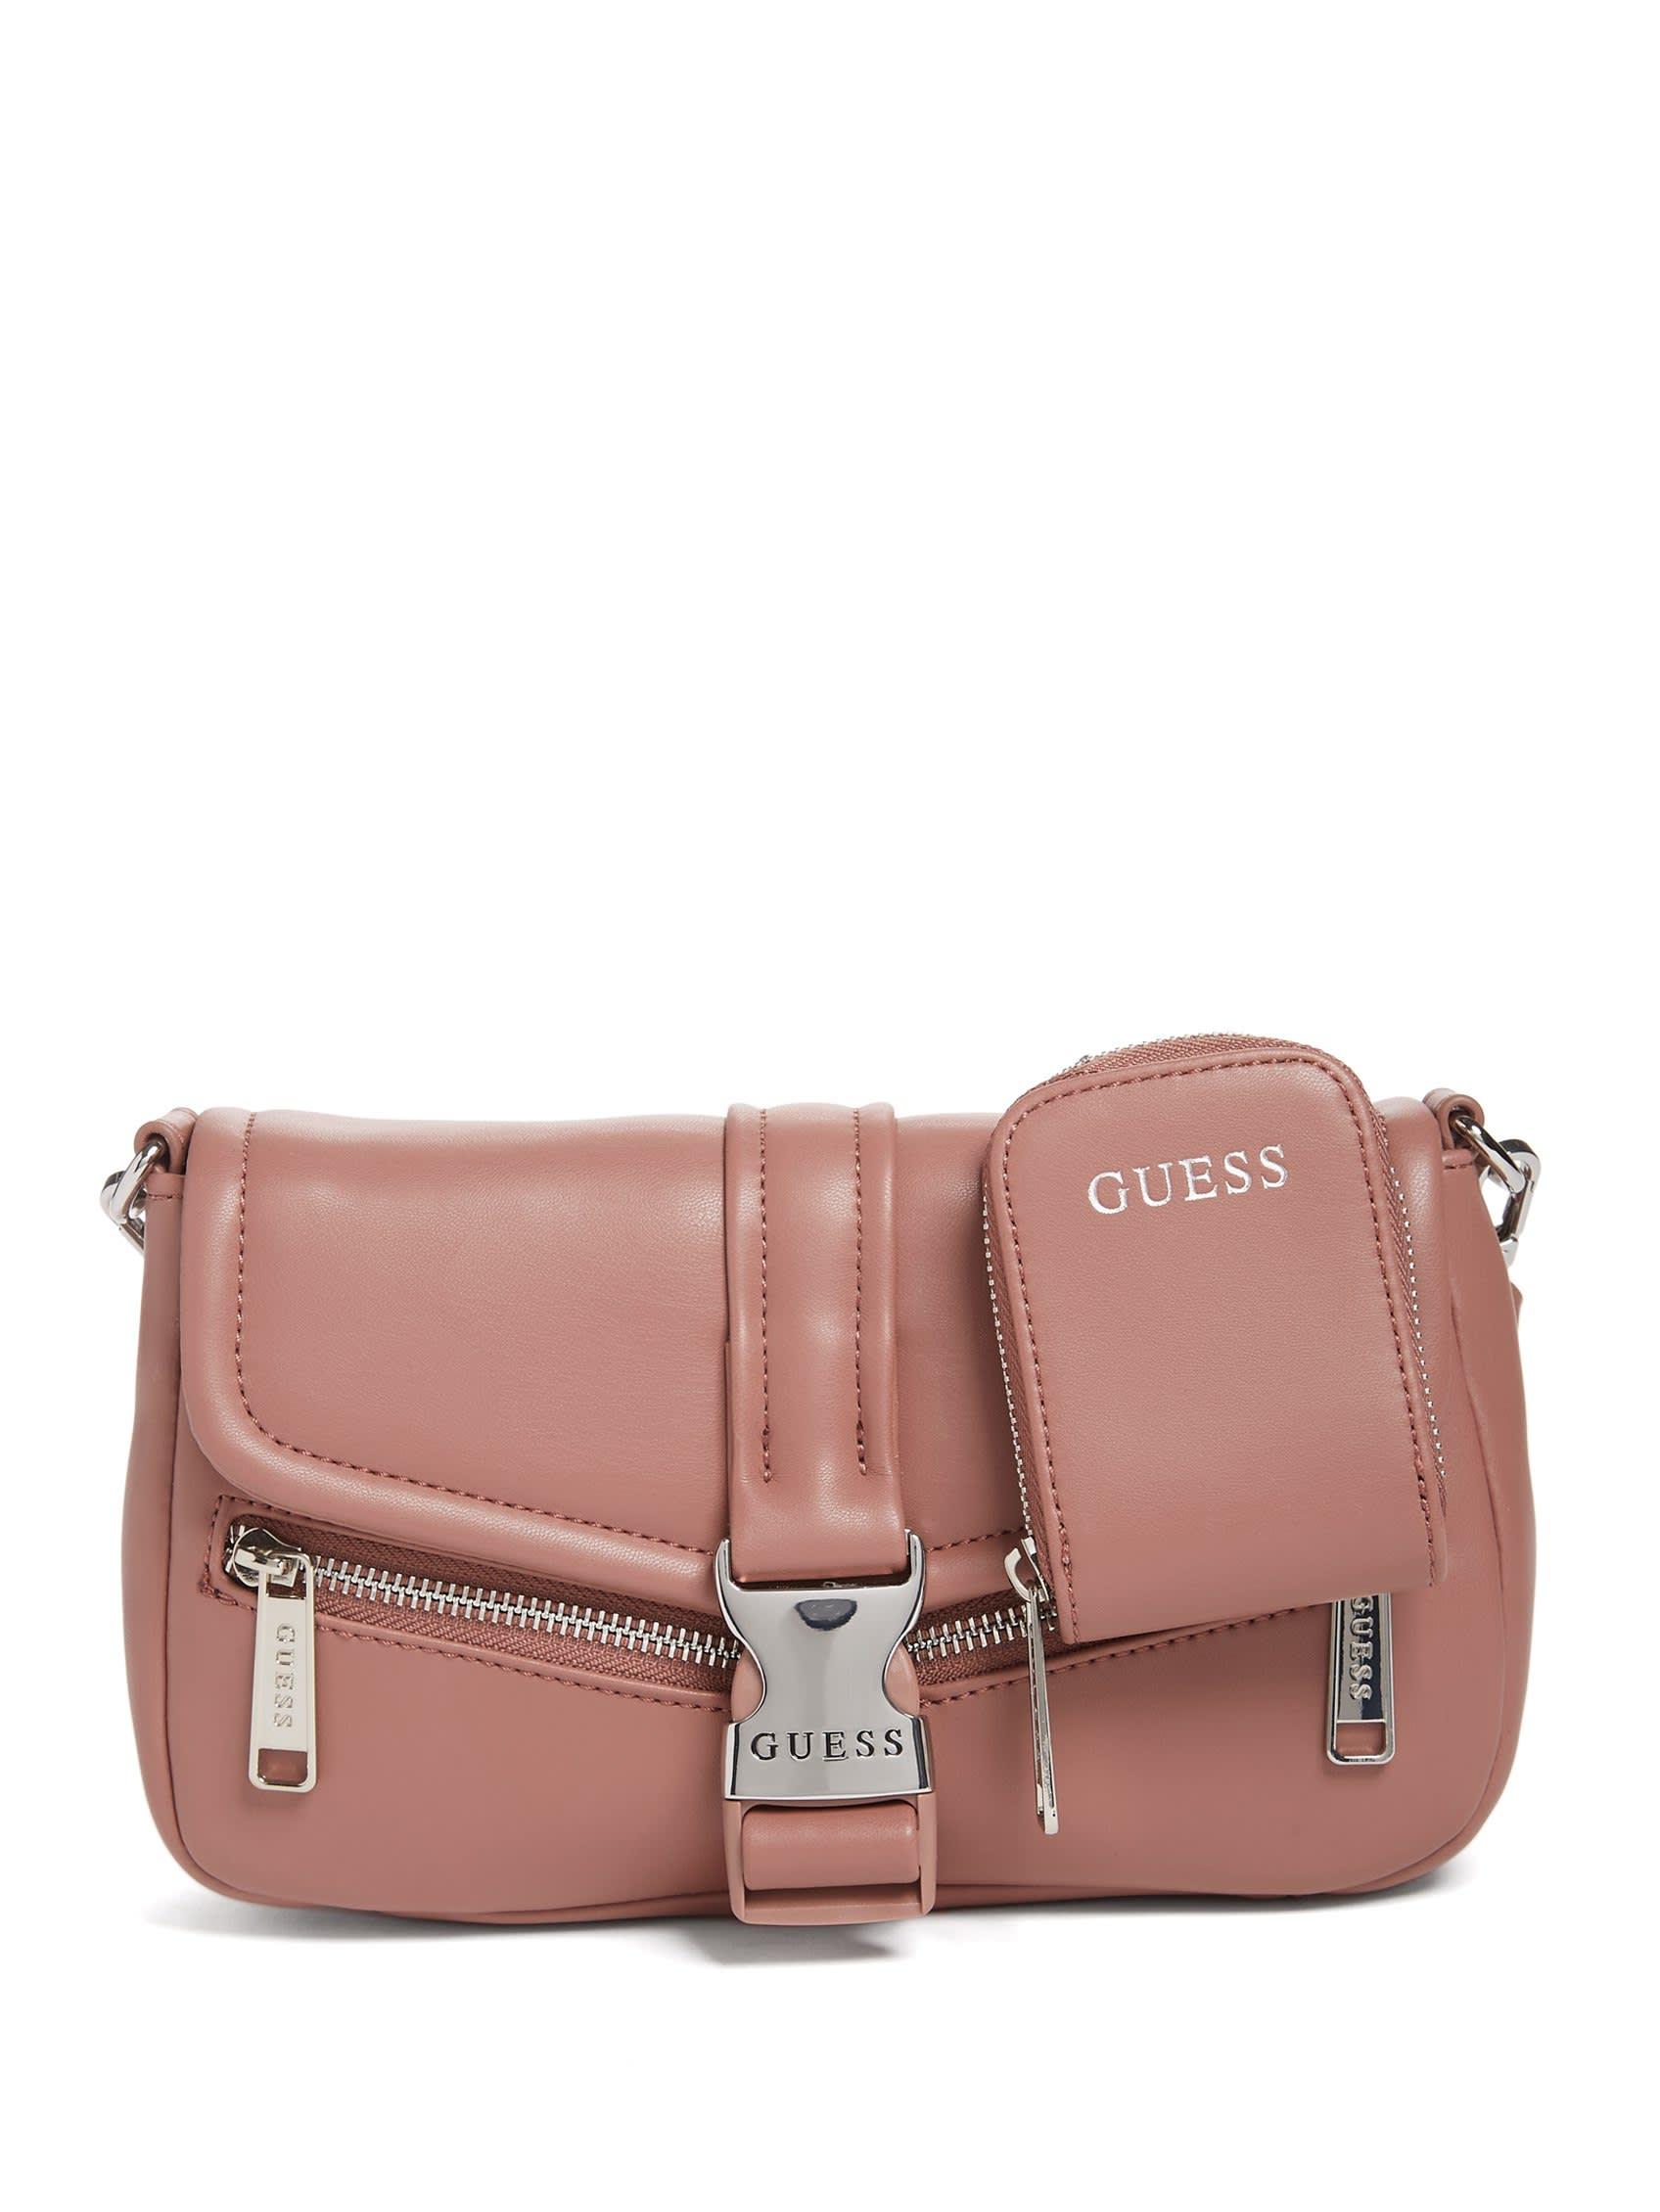 Guess Factory Sydney Crossbody in Red